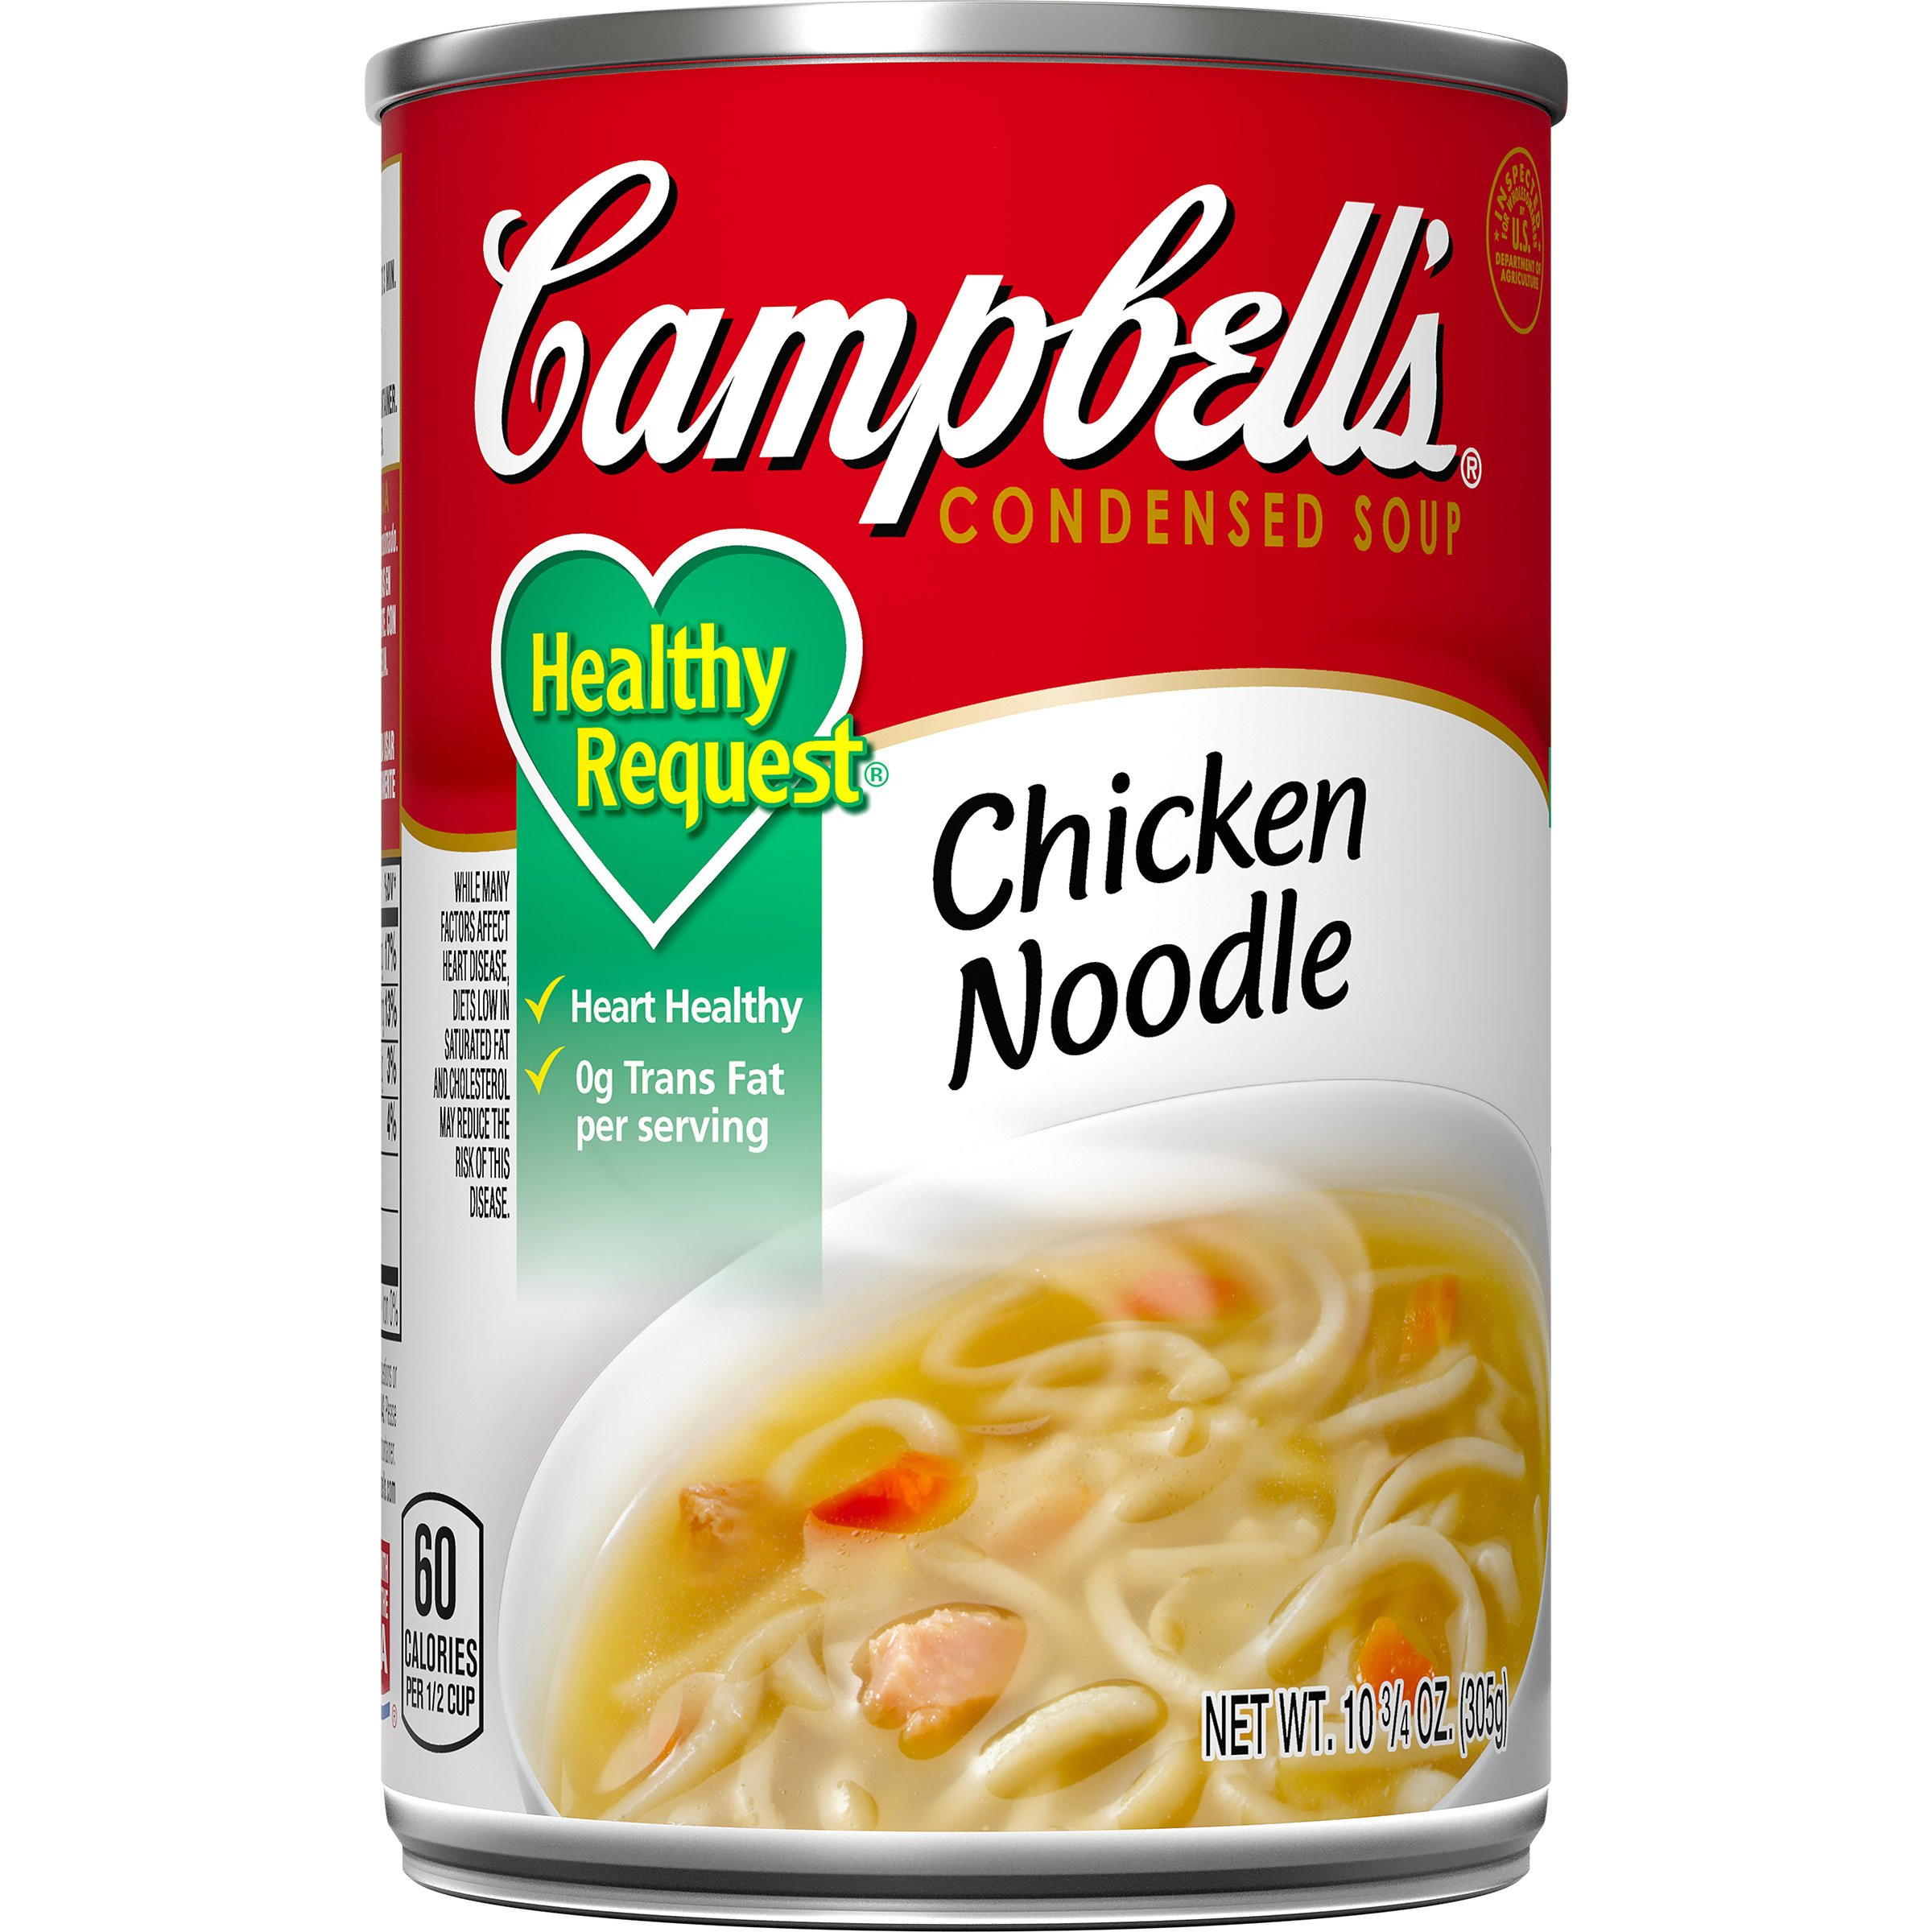 Campbells Chicken Noodle Soup
 Amazon Campbell s Healthy Request Condensed Soup